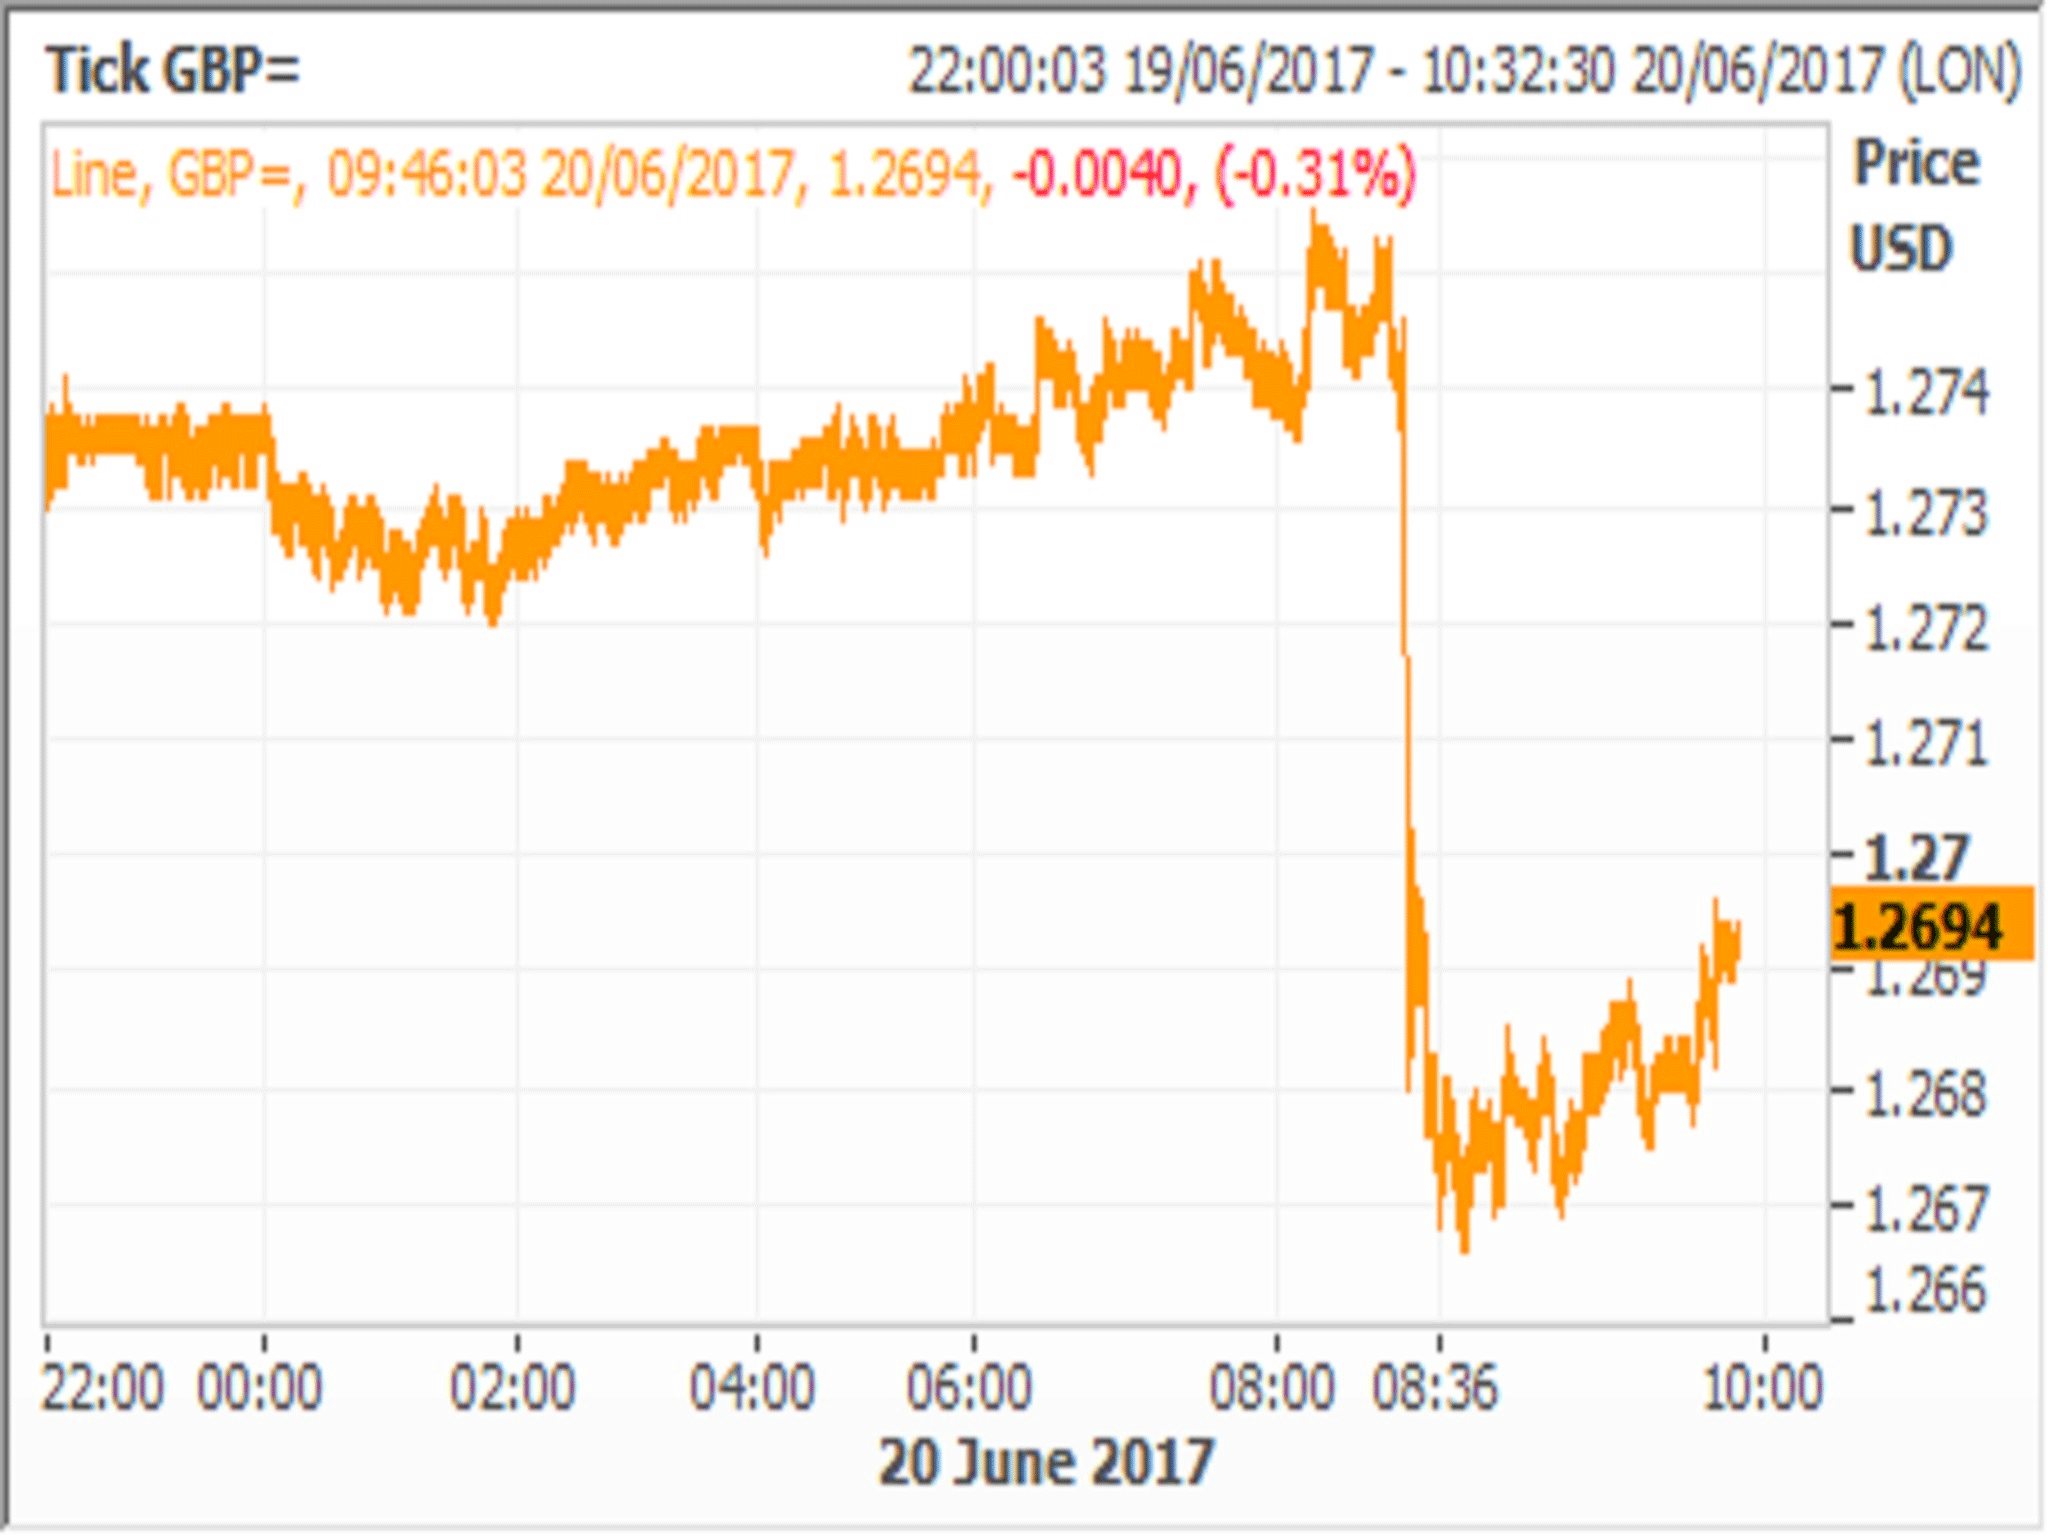 Sterling traded around $1.268 after the comments, having earlier in the session been above $1.275